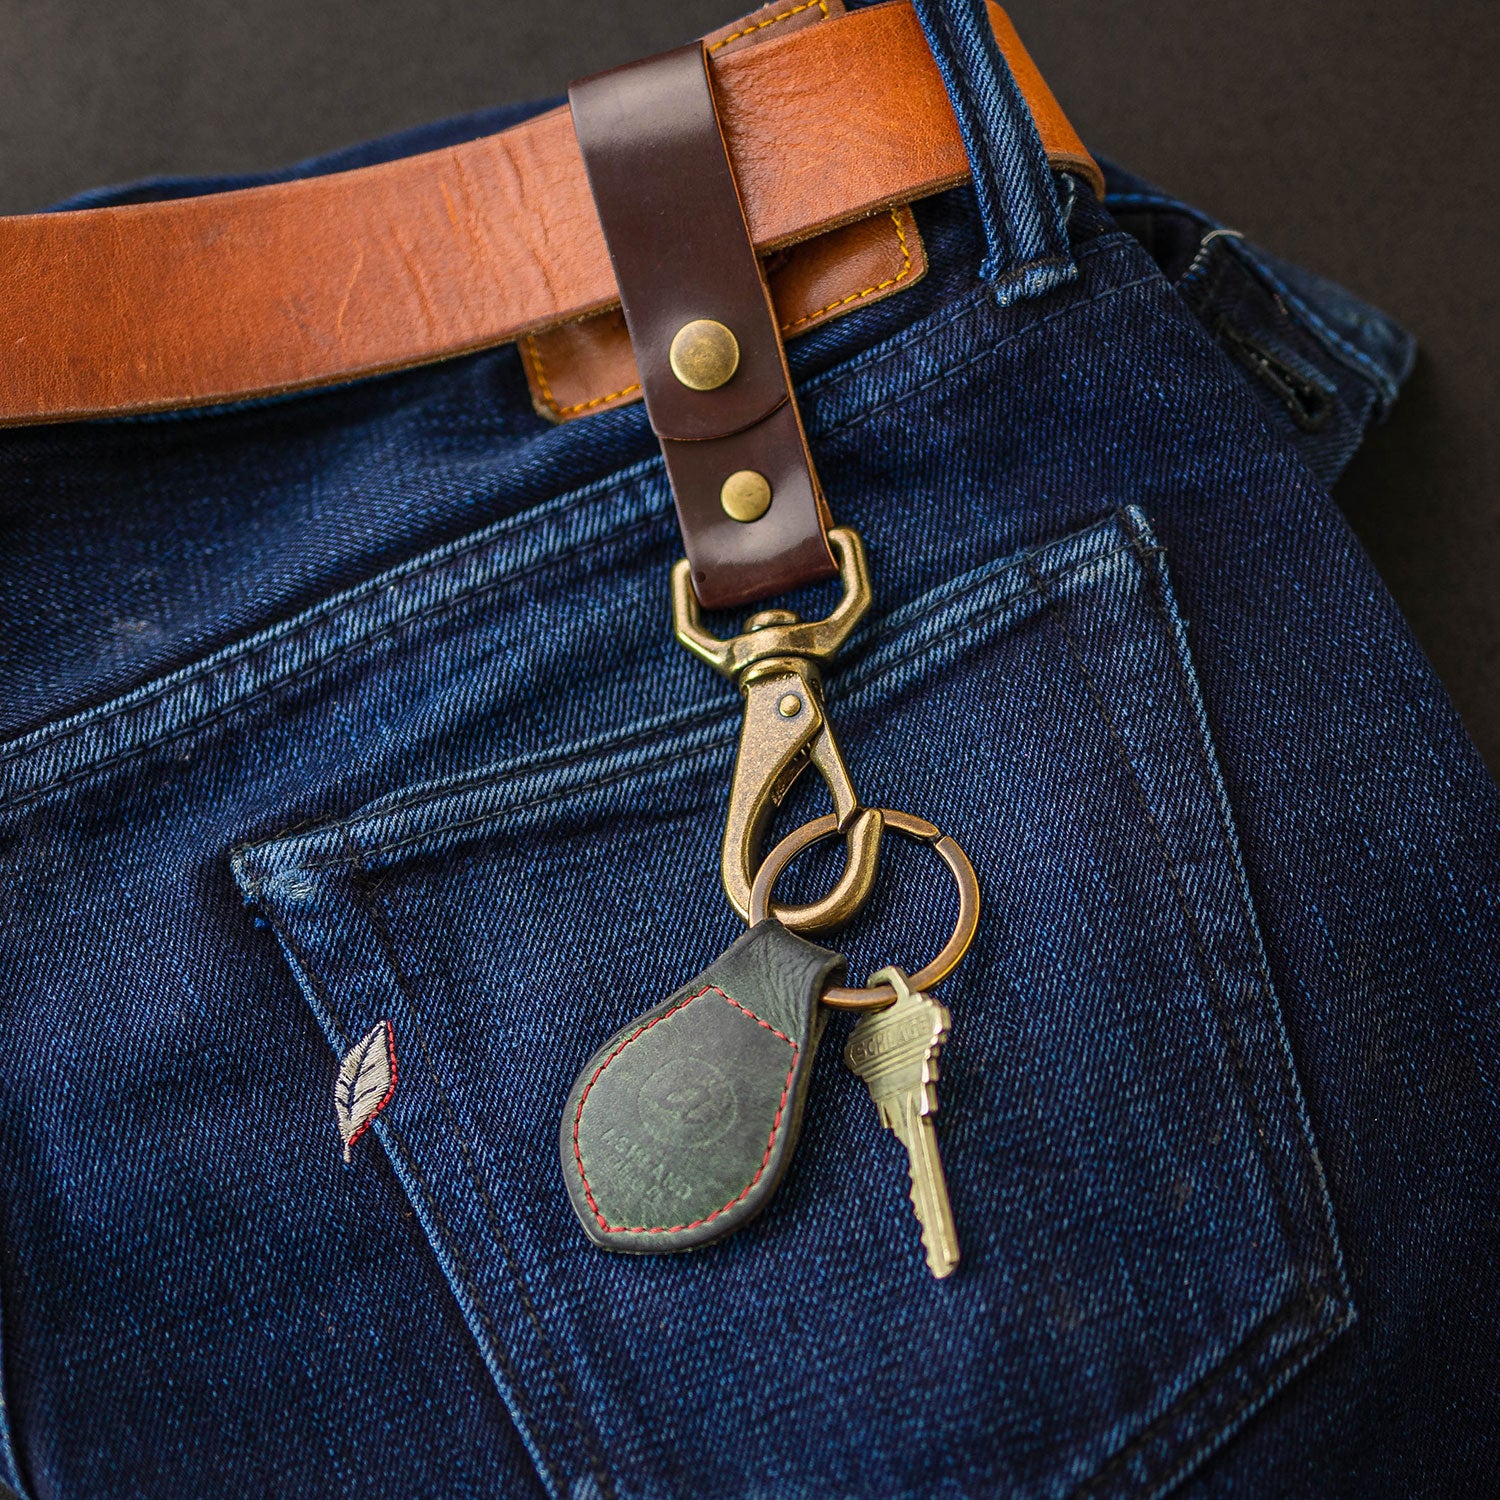 Leather Keychain Hanger Belt Loop Key Chain Belt Lanyard Keychain Holder  Special Unique Gifts Hook Key Ring Leather Goods Accessories 